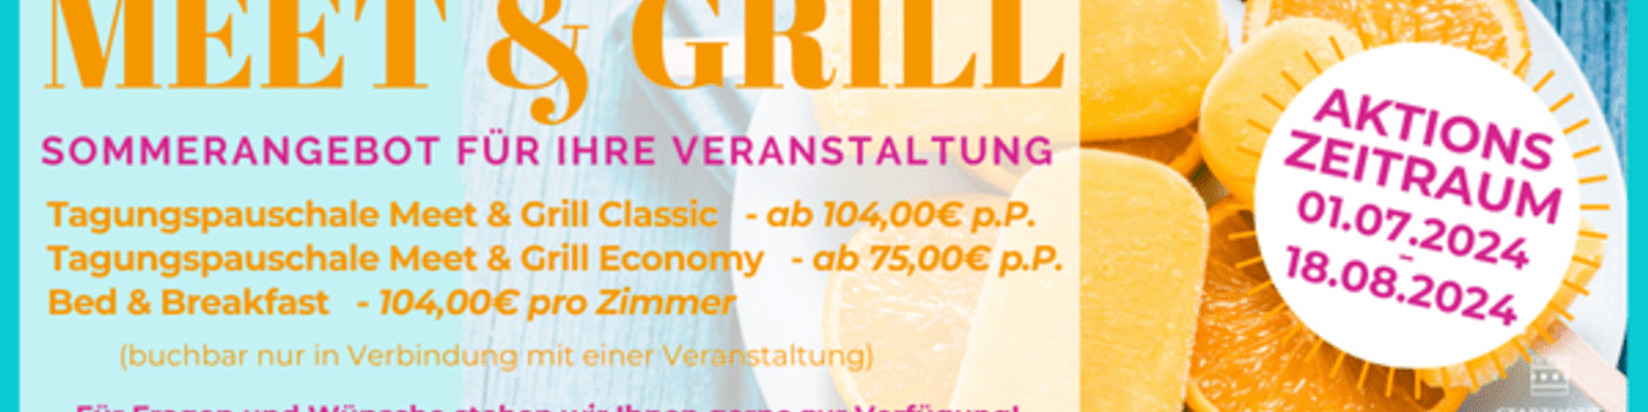 Meet & Grill (1) 548- 412.png